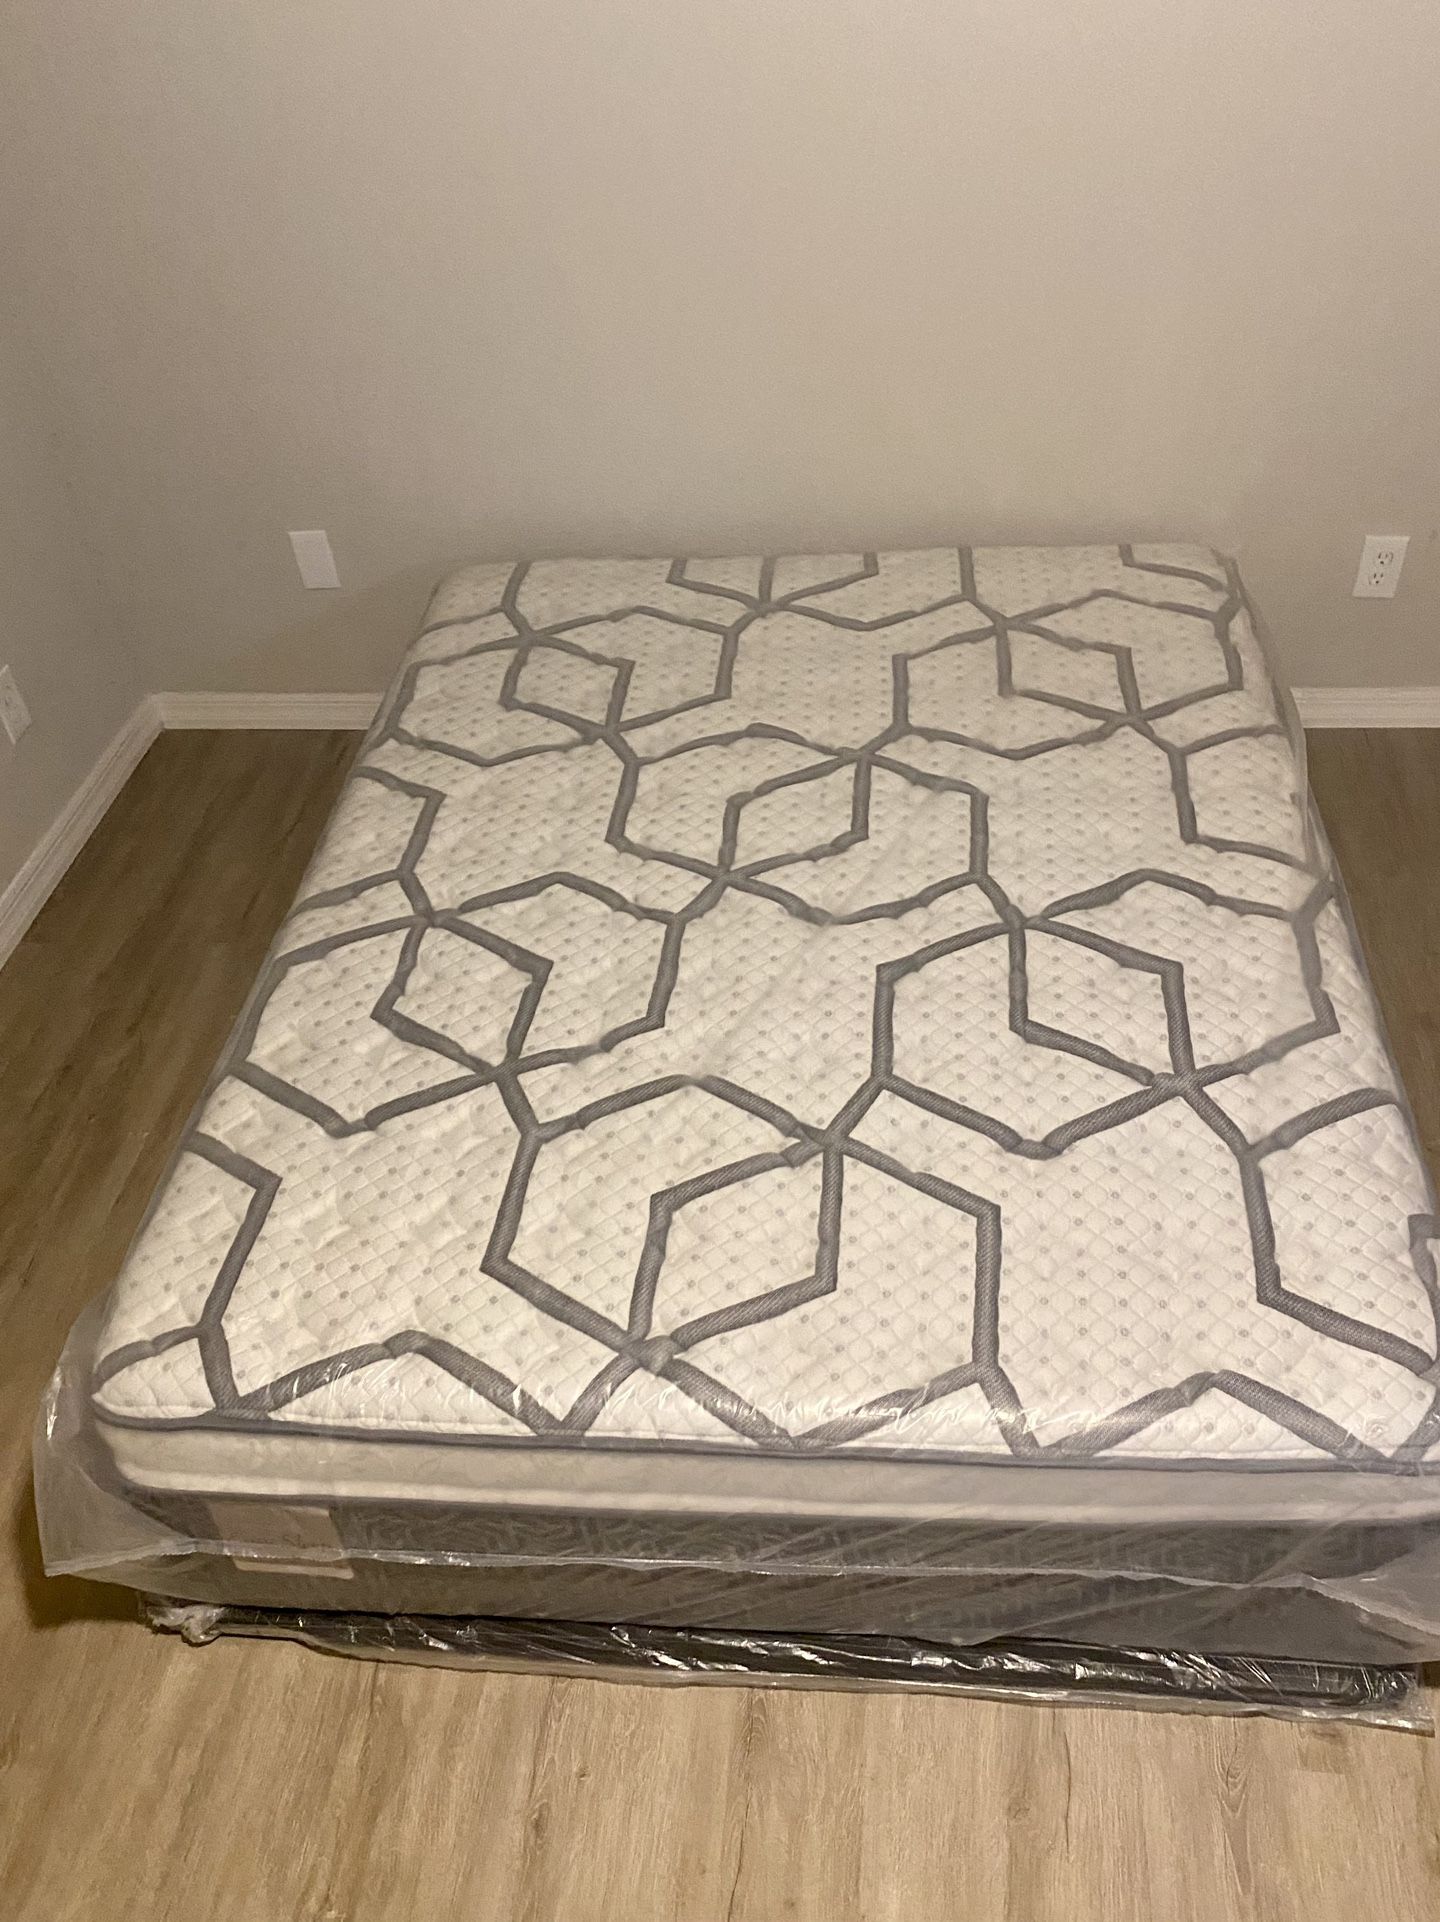 Queen Size Mattress Pillow Top 14” Inches Thick Excellent Comfort Also Available: Twin, Full And King New From Factory Delivery Available